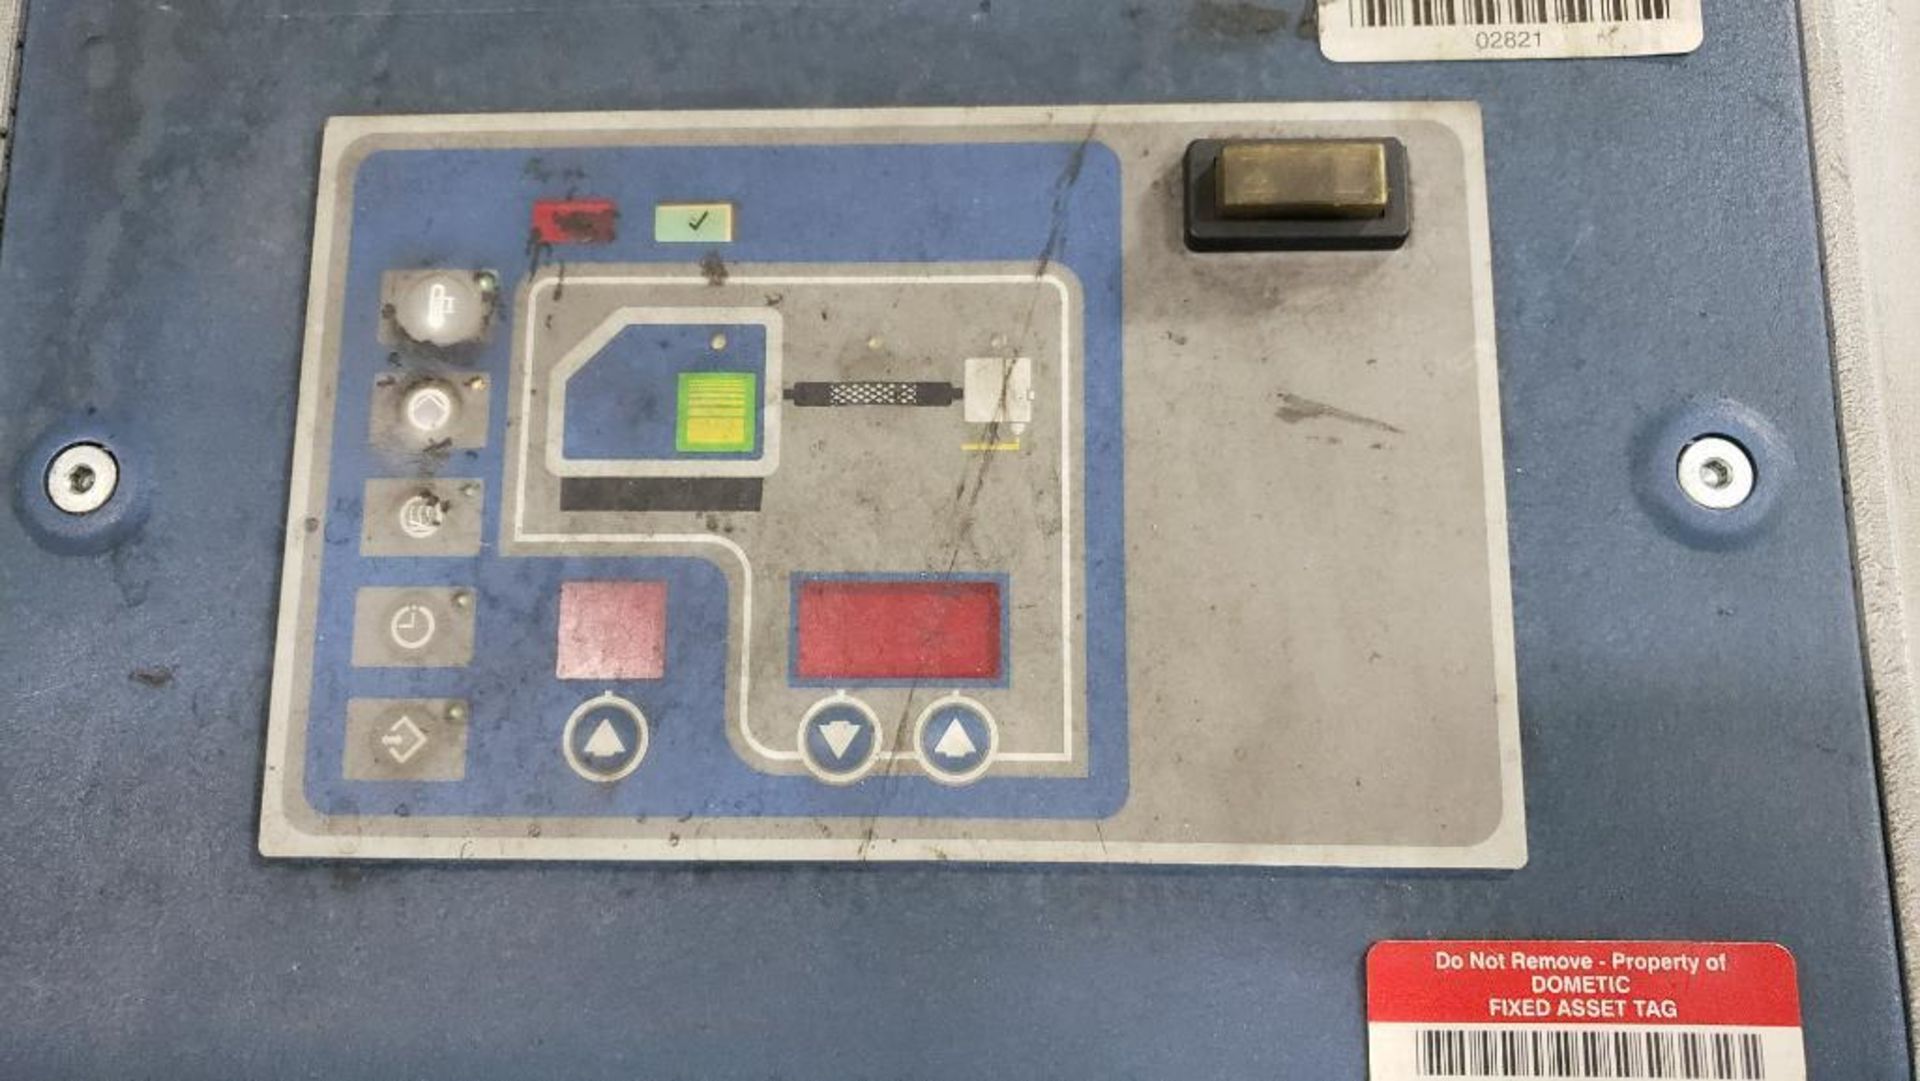 Nordson DuraBlue 10 adhesive dispensing system. 1026754A. - Image 6 of 10